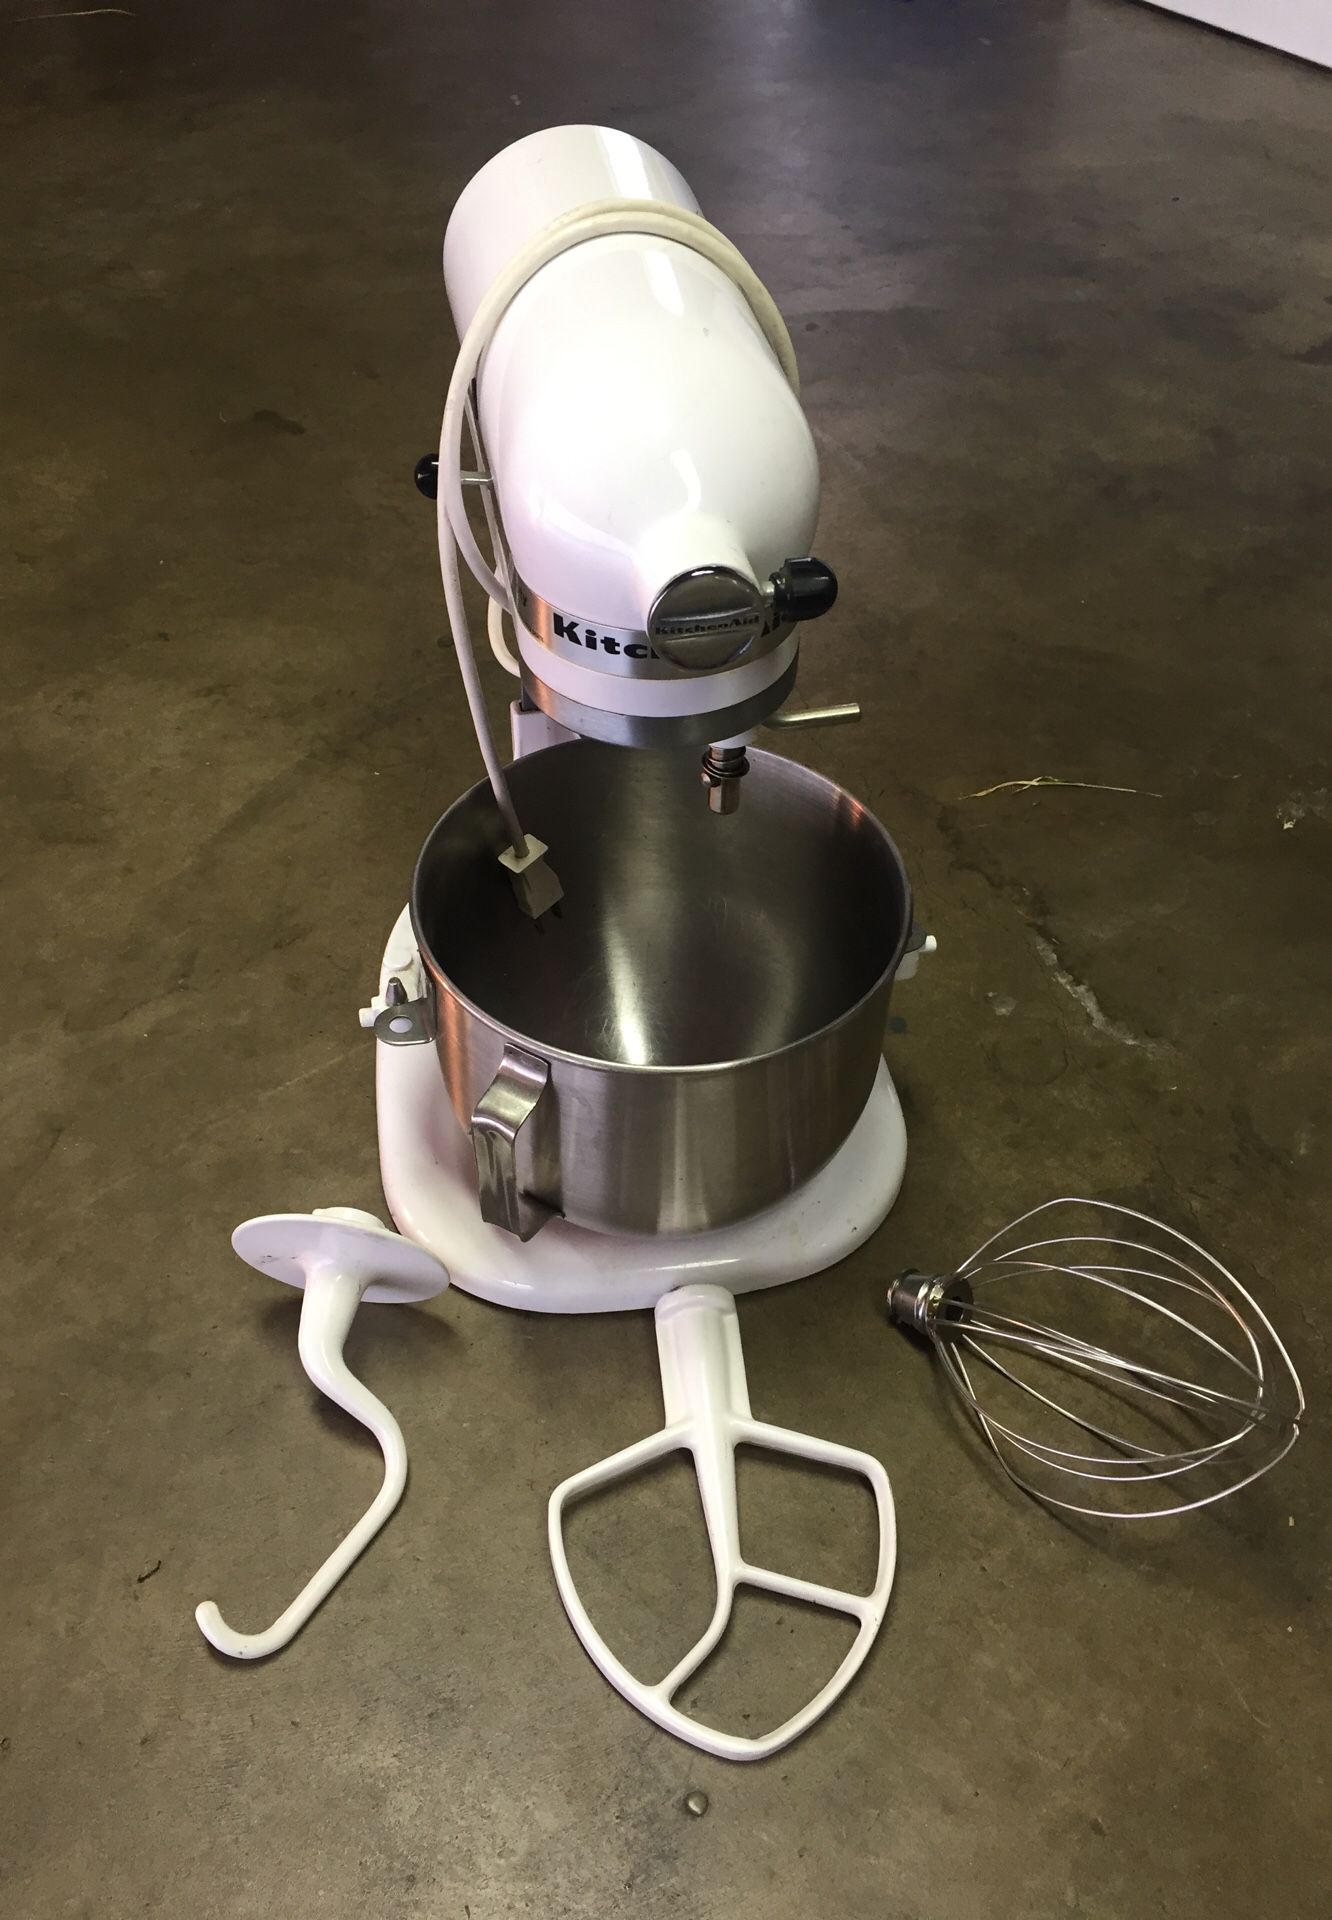 KitchenAid Mixer K5SS Heavy Duty 10 Speed Stand Alone - No Attachments or  bowl